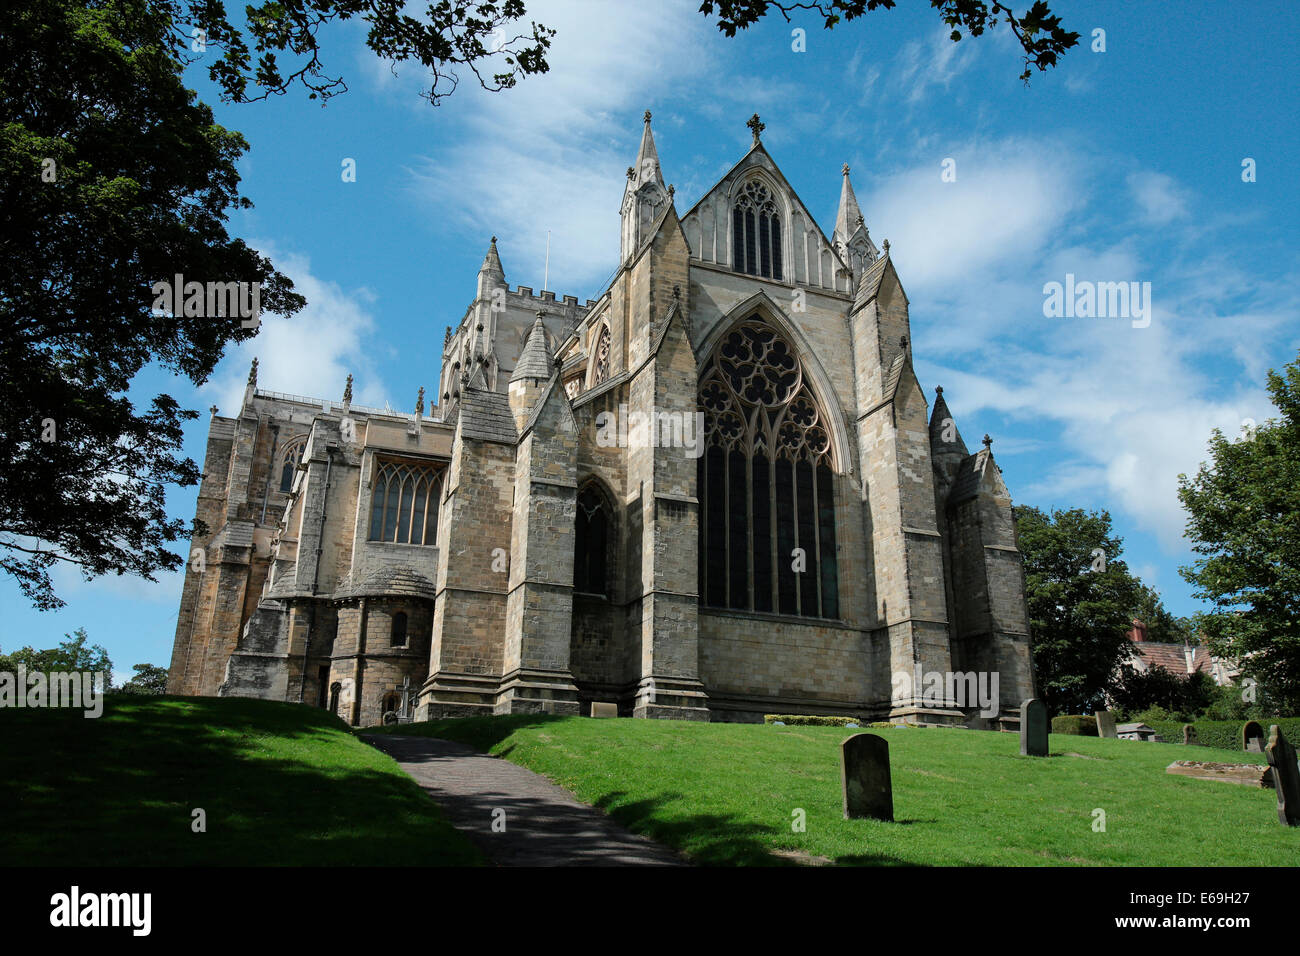 Ripon Cathedral in the small North Yorkshire city of Ripon, England. Stock Photo